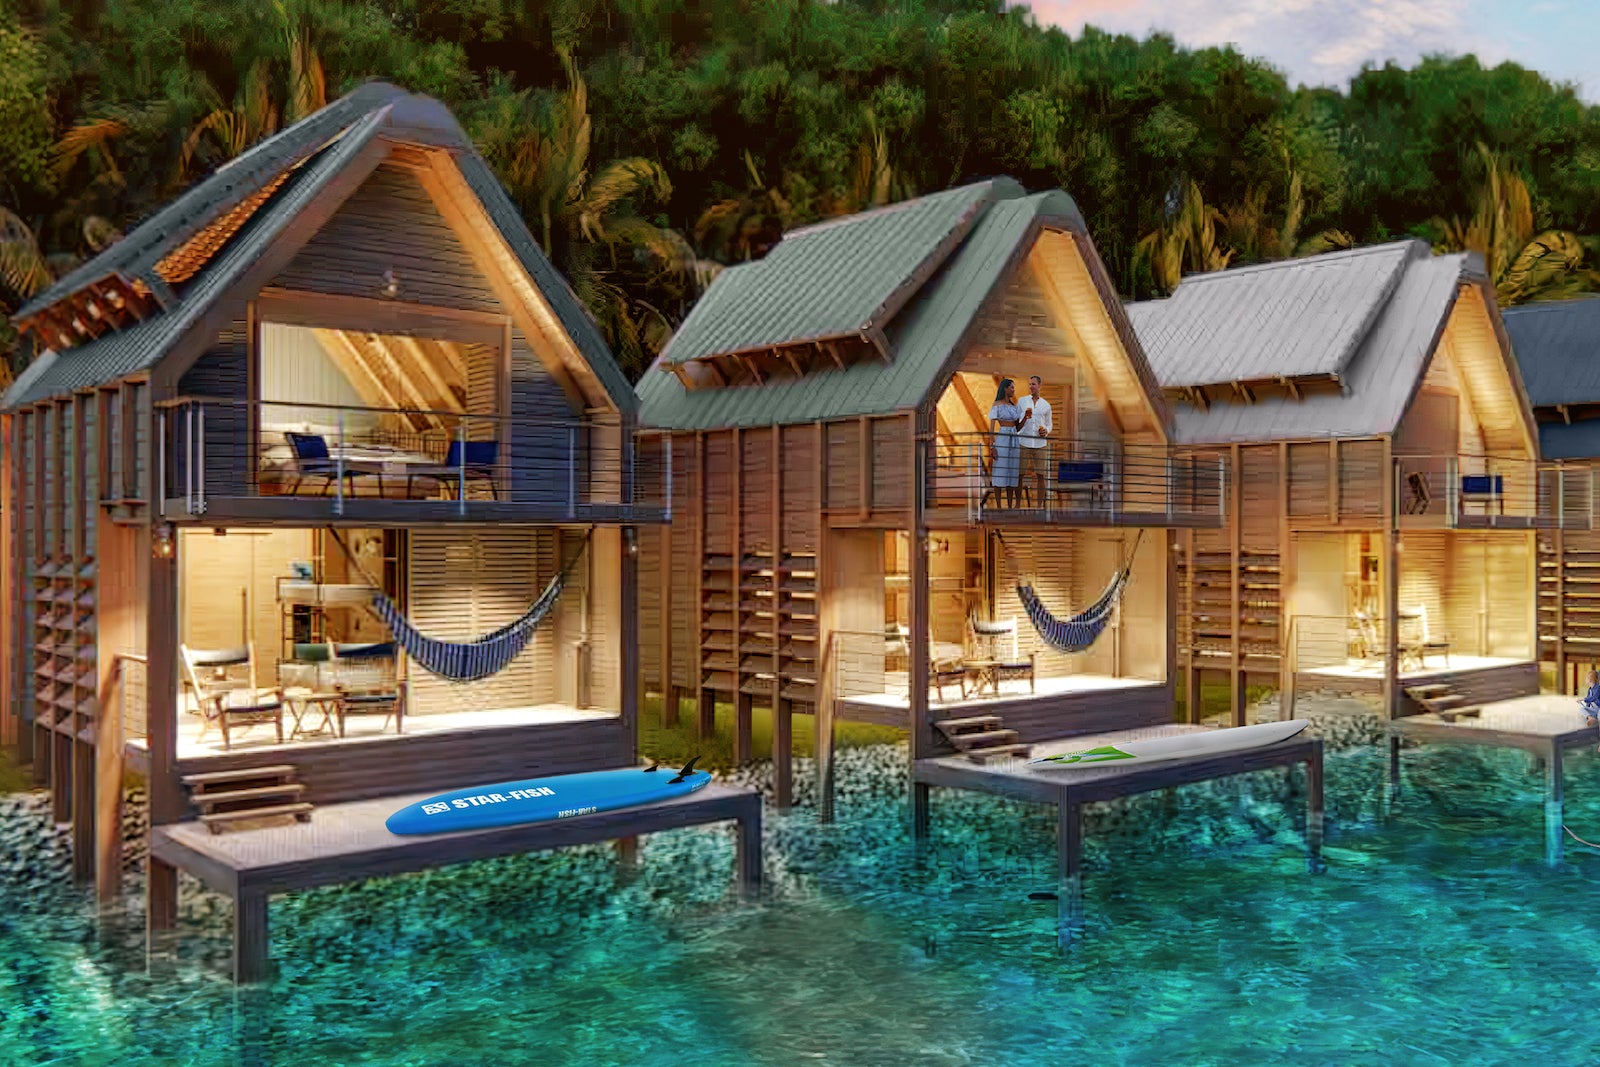 rendering of overwater bungalows with balconies, lofts and blue waters